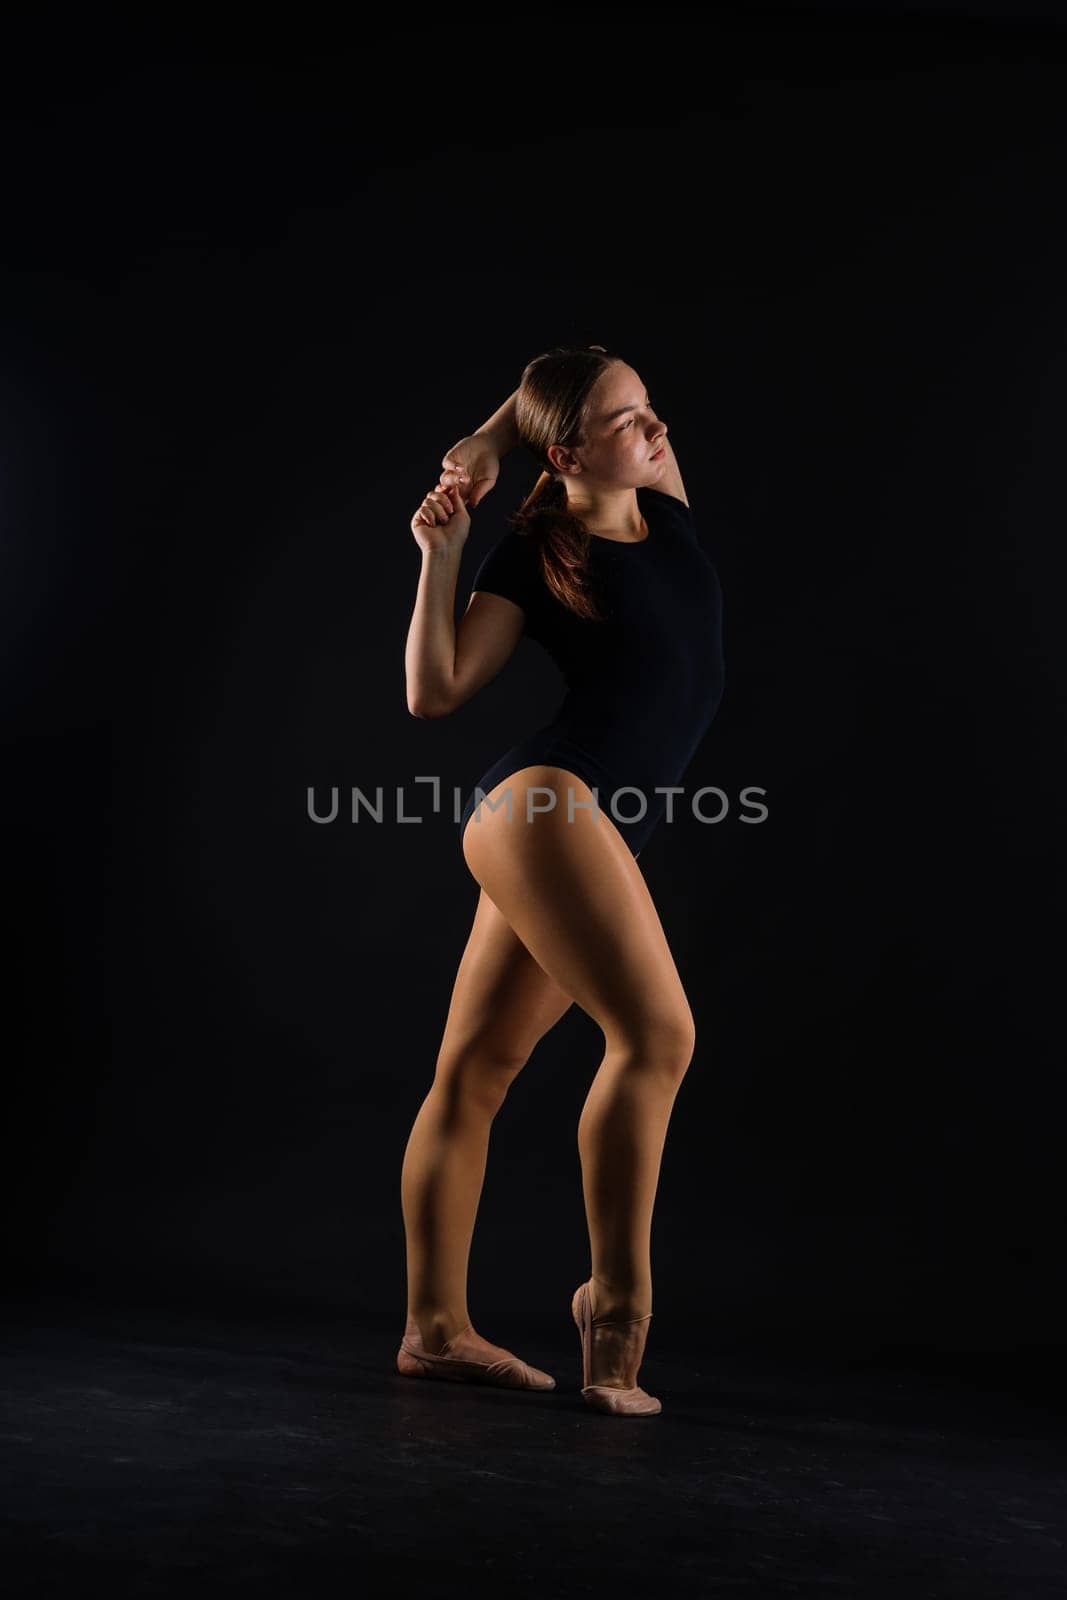 Gymnastics, woman acrobat, female gymnast strong flexible body over black and white backgrounds